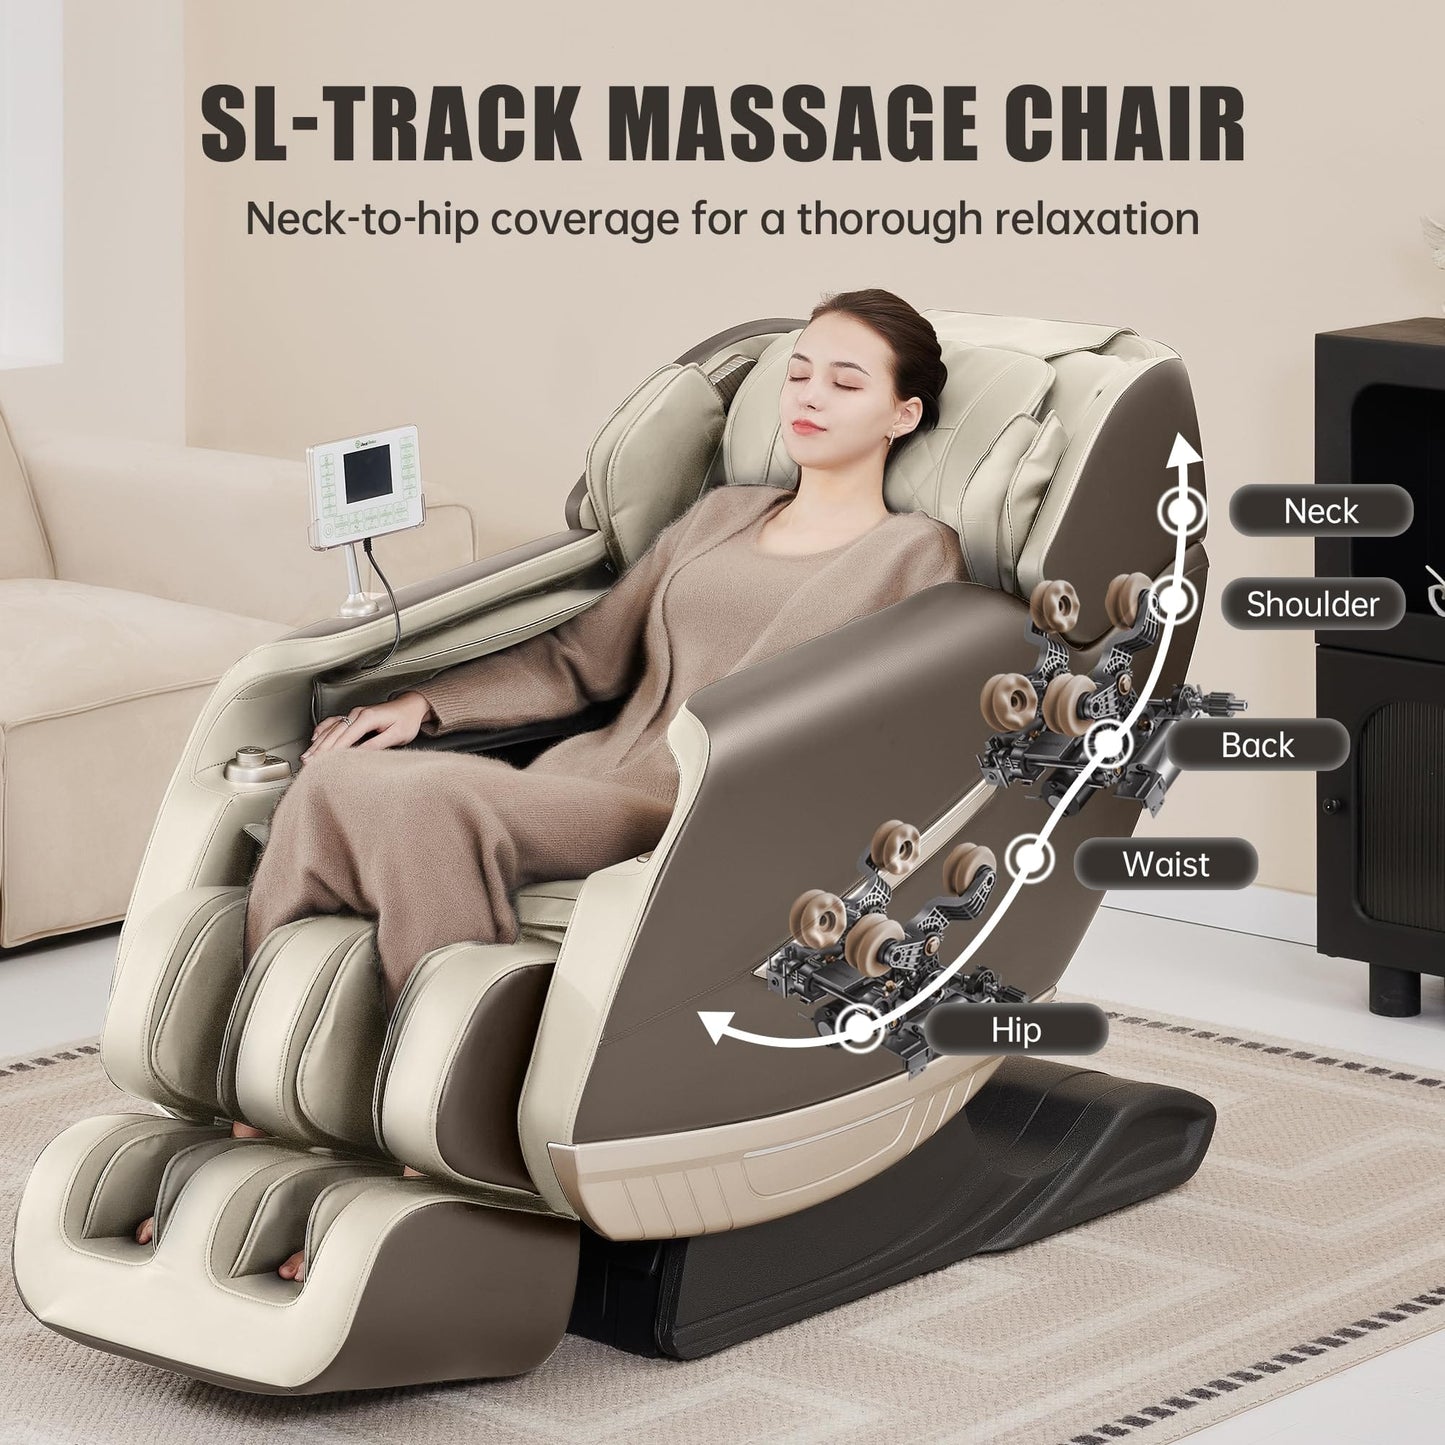 Real Relax Massage Chair PS3800 Massage Chair Brown